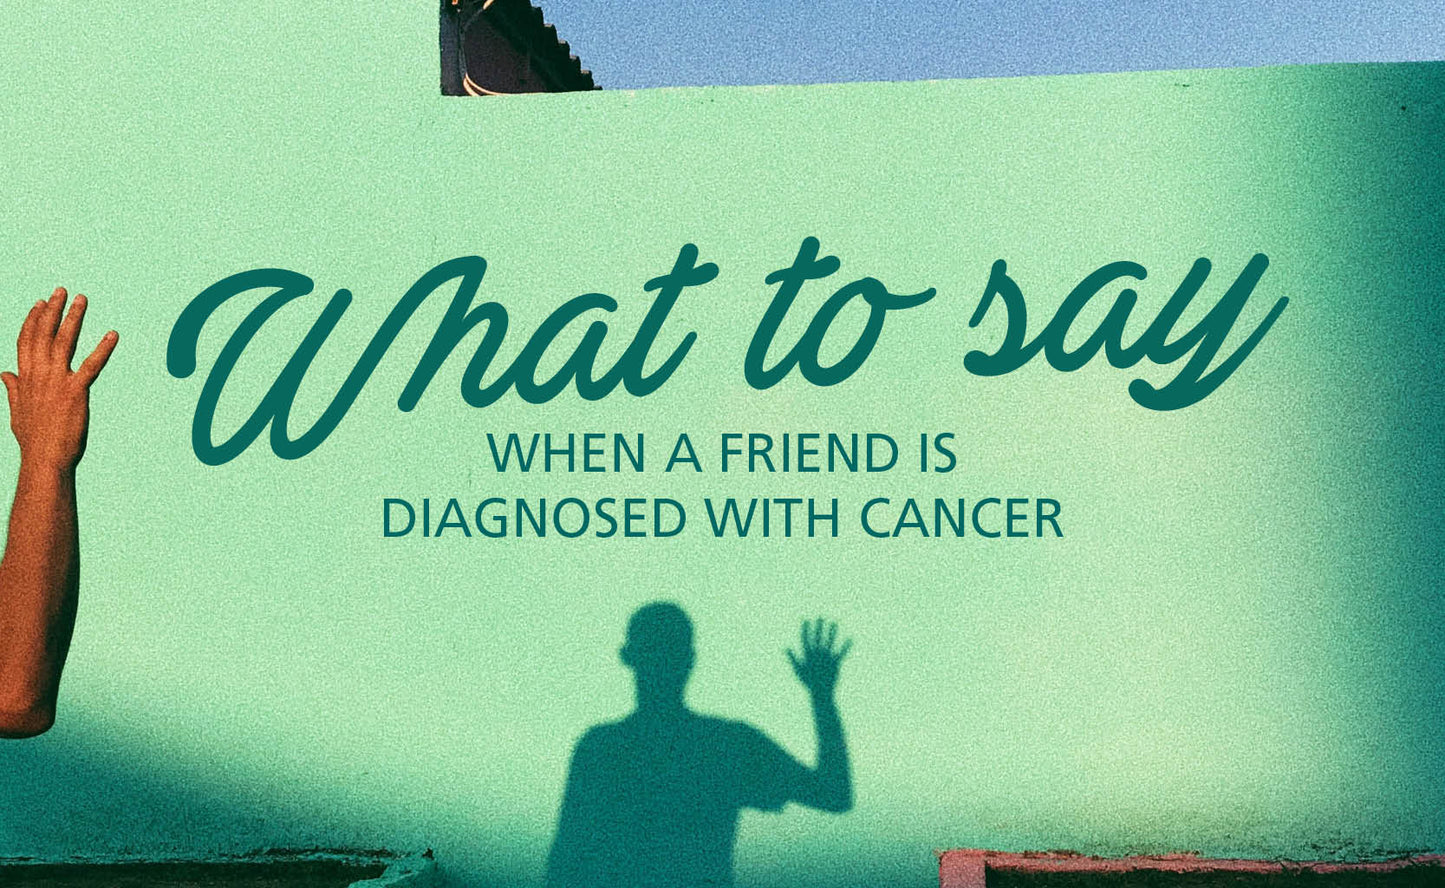 What to say when a friend is diagnosed with cancer.